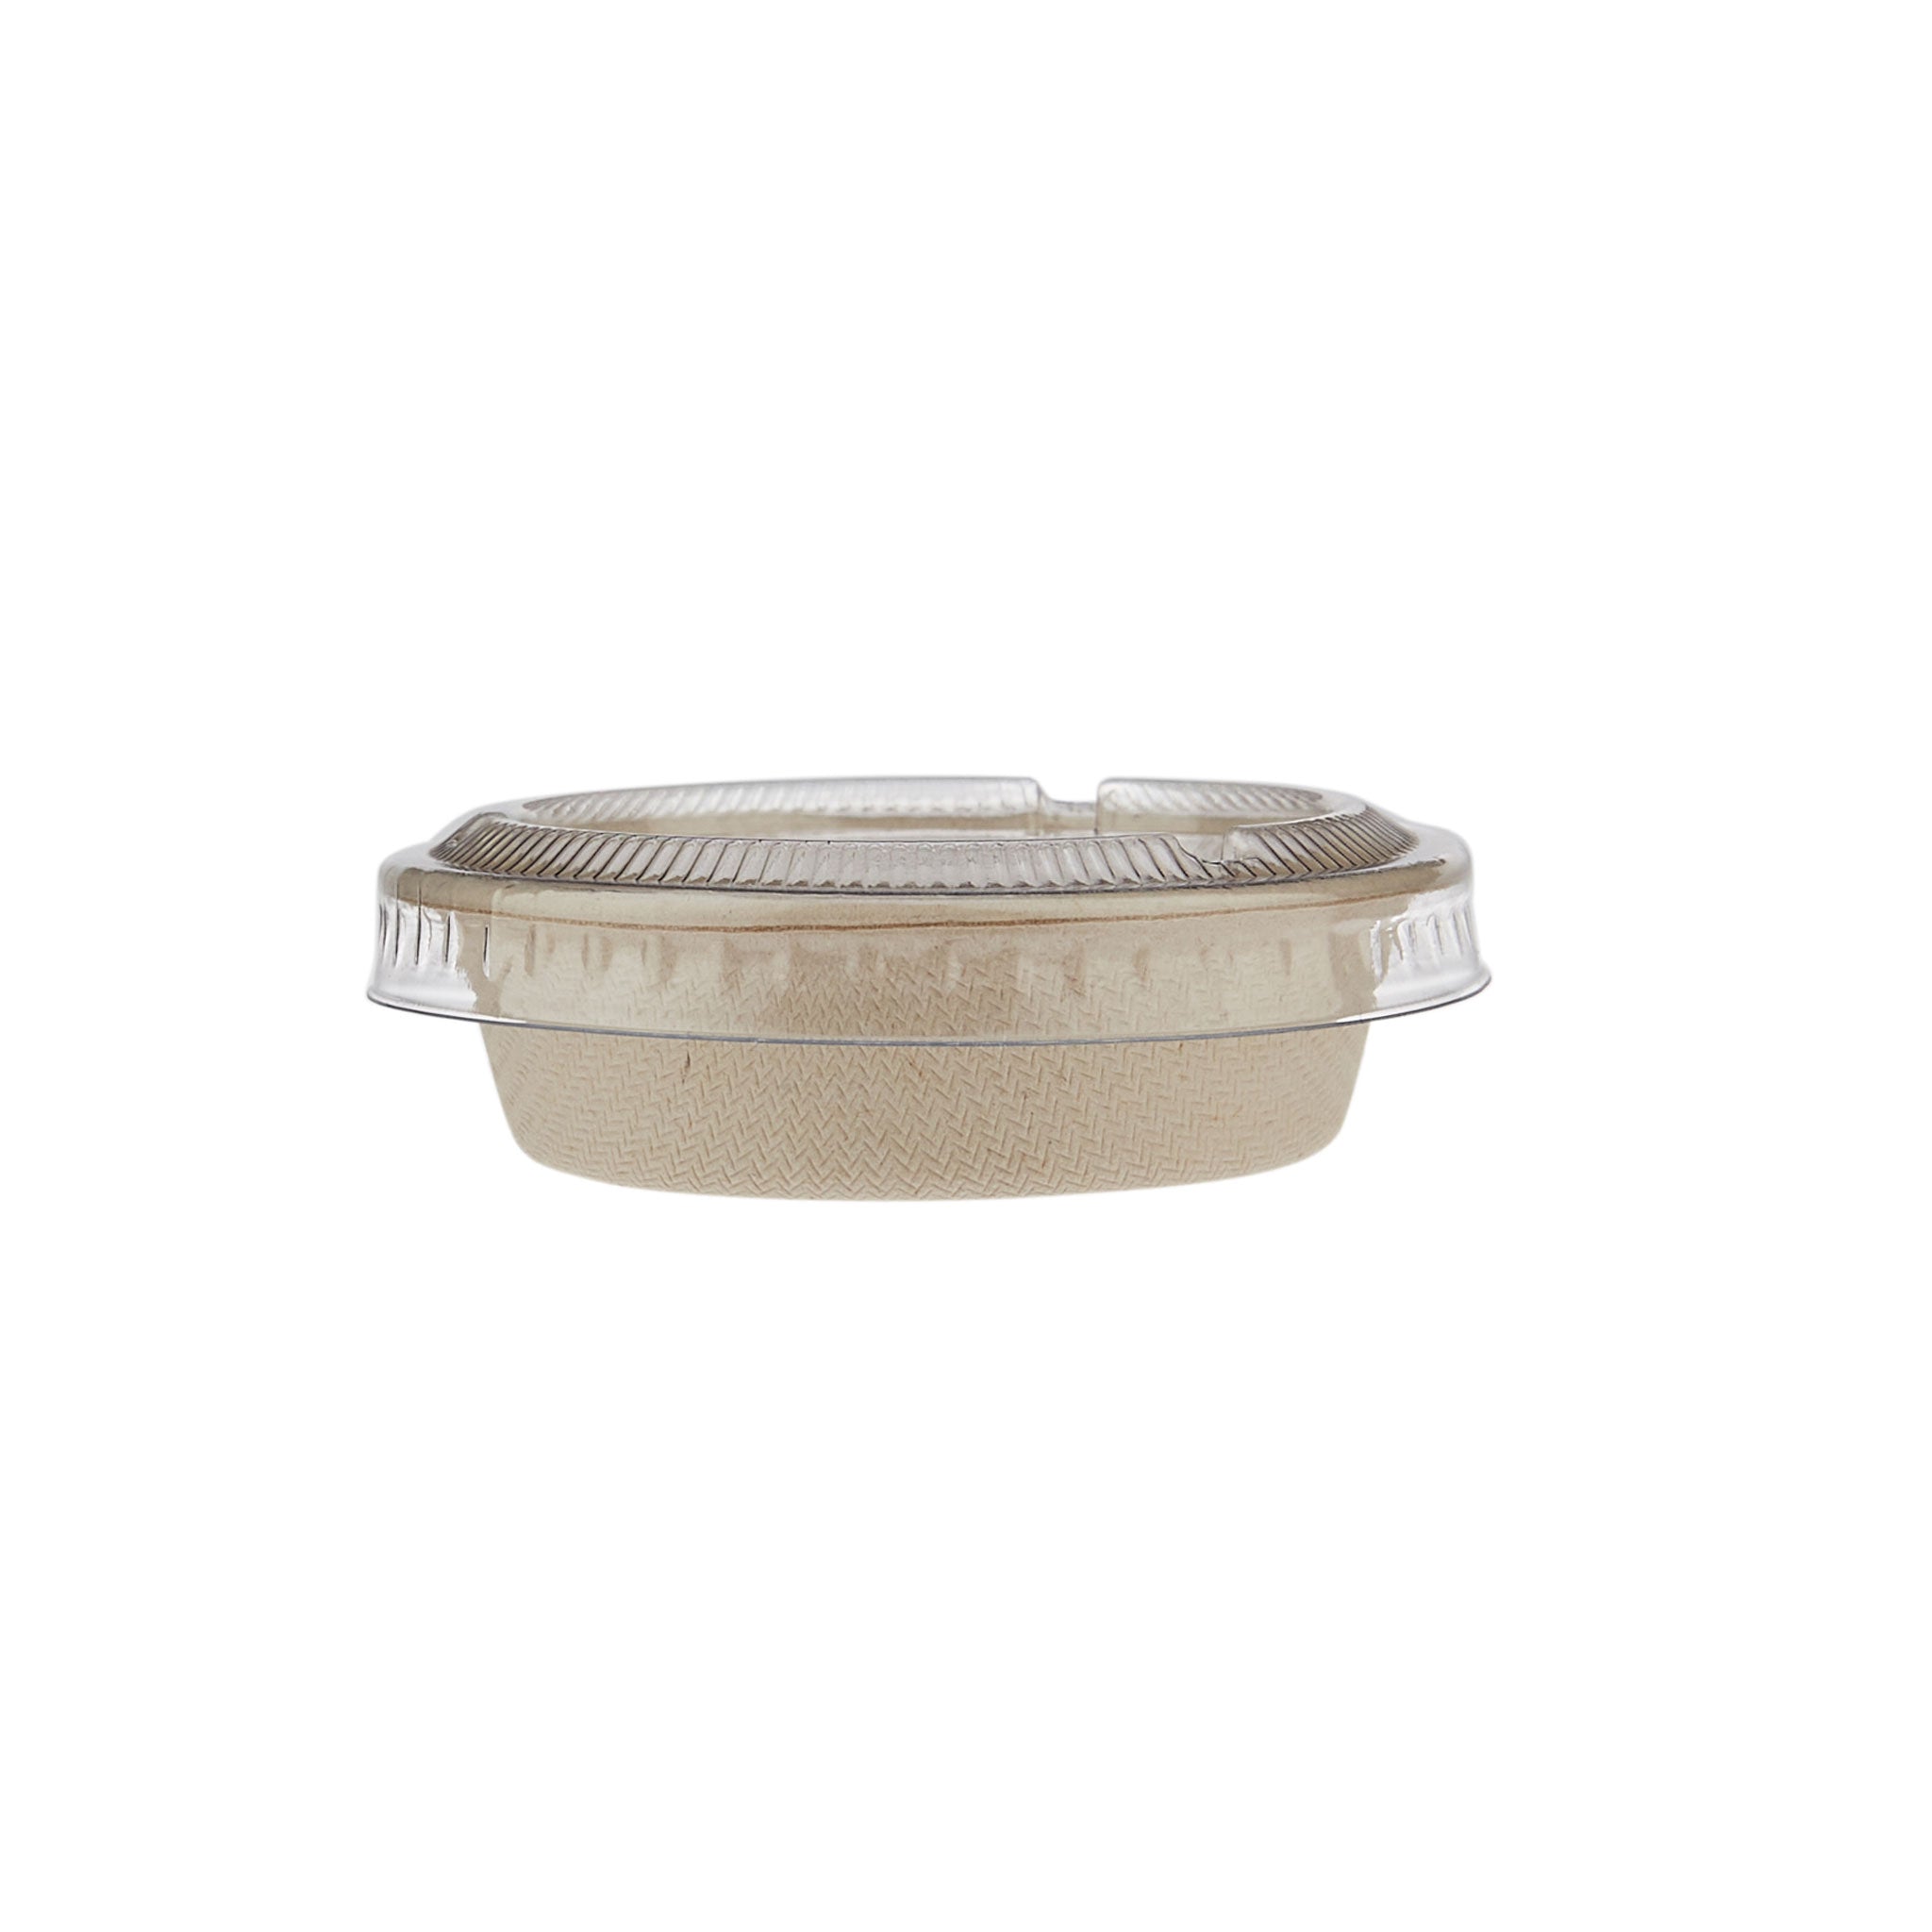 Biodegradable 1 Oz Cup - 2000 Pieces - Hotpack Global